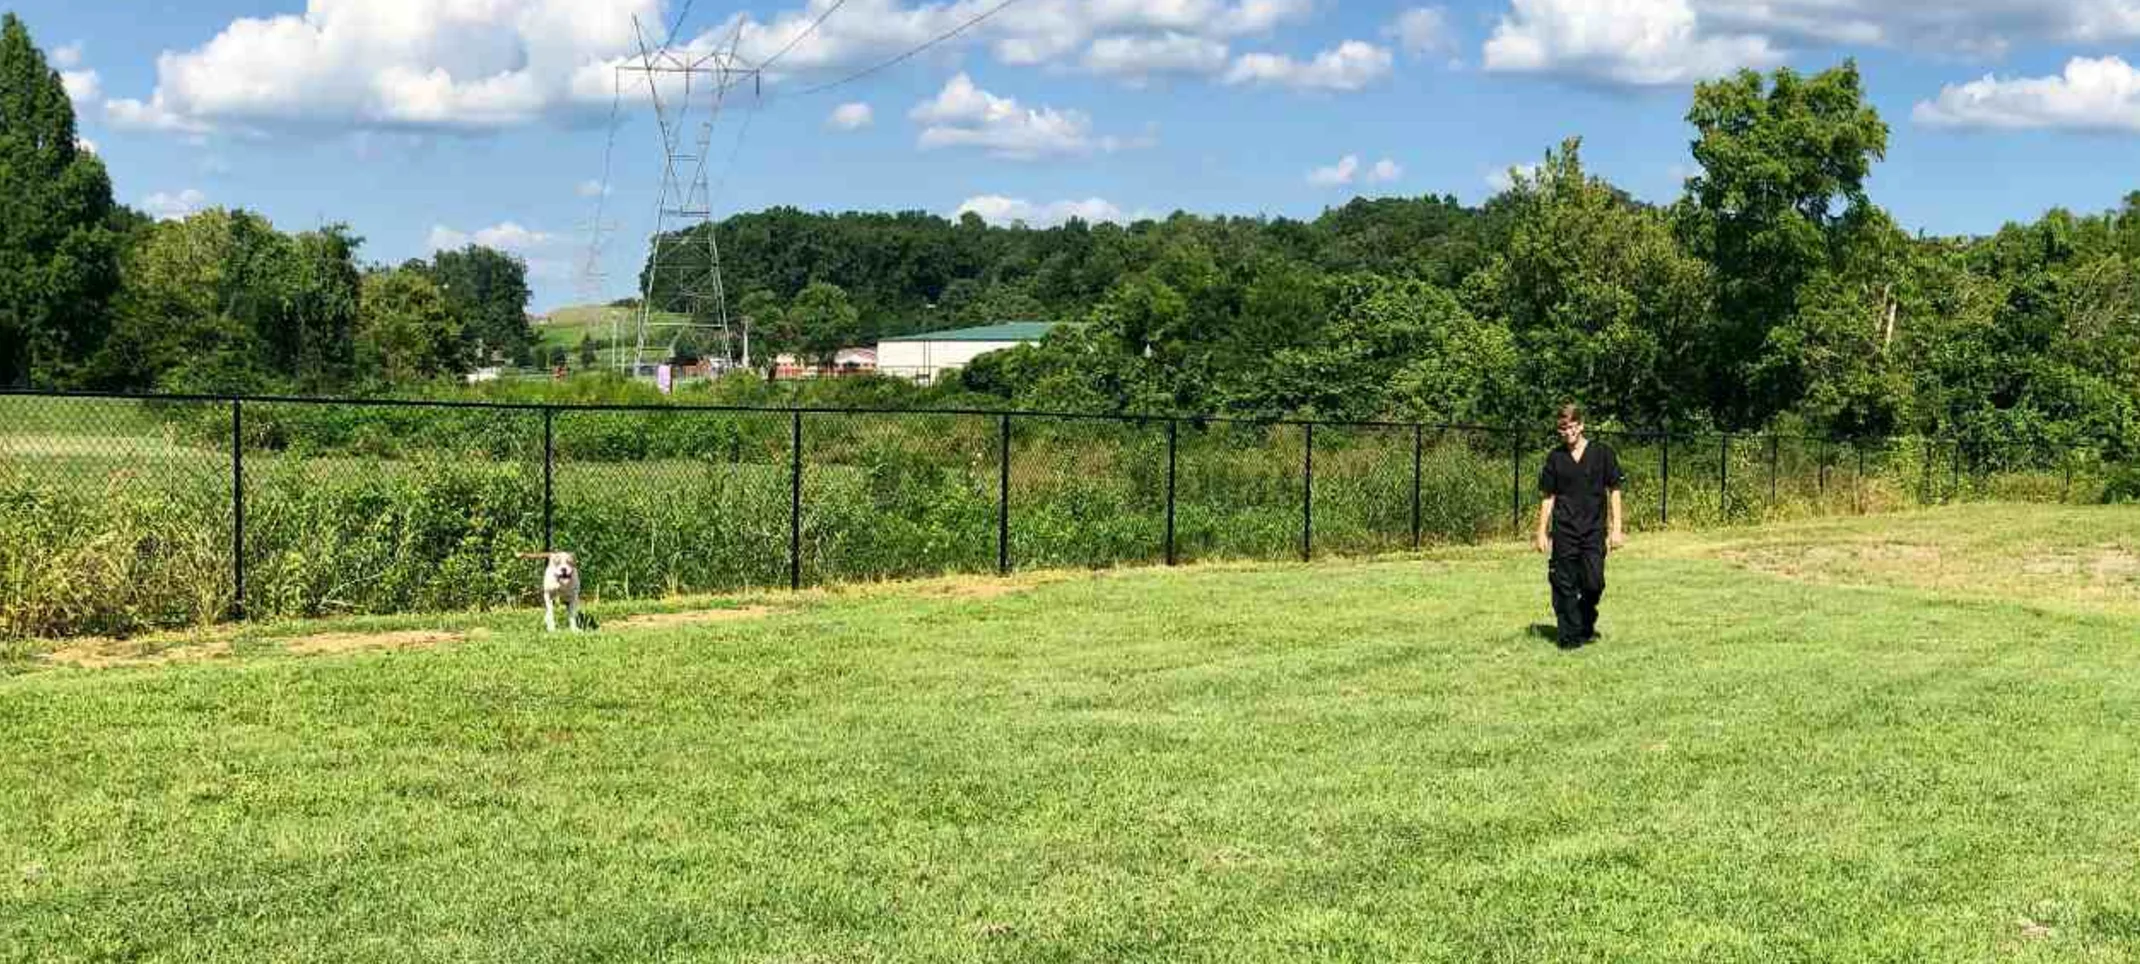 A large green fenced area where a Taylor Animal Hospital veterinary staff is walking with a large dog in the distance